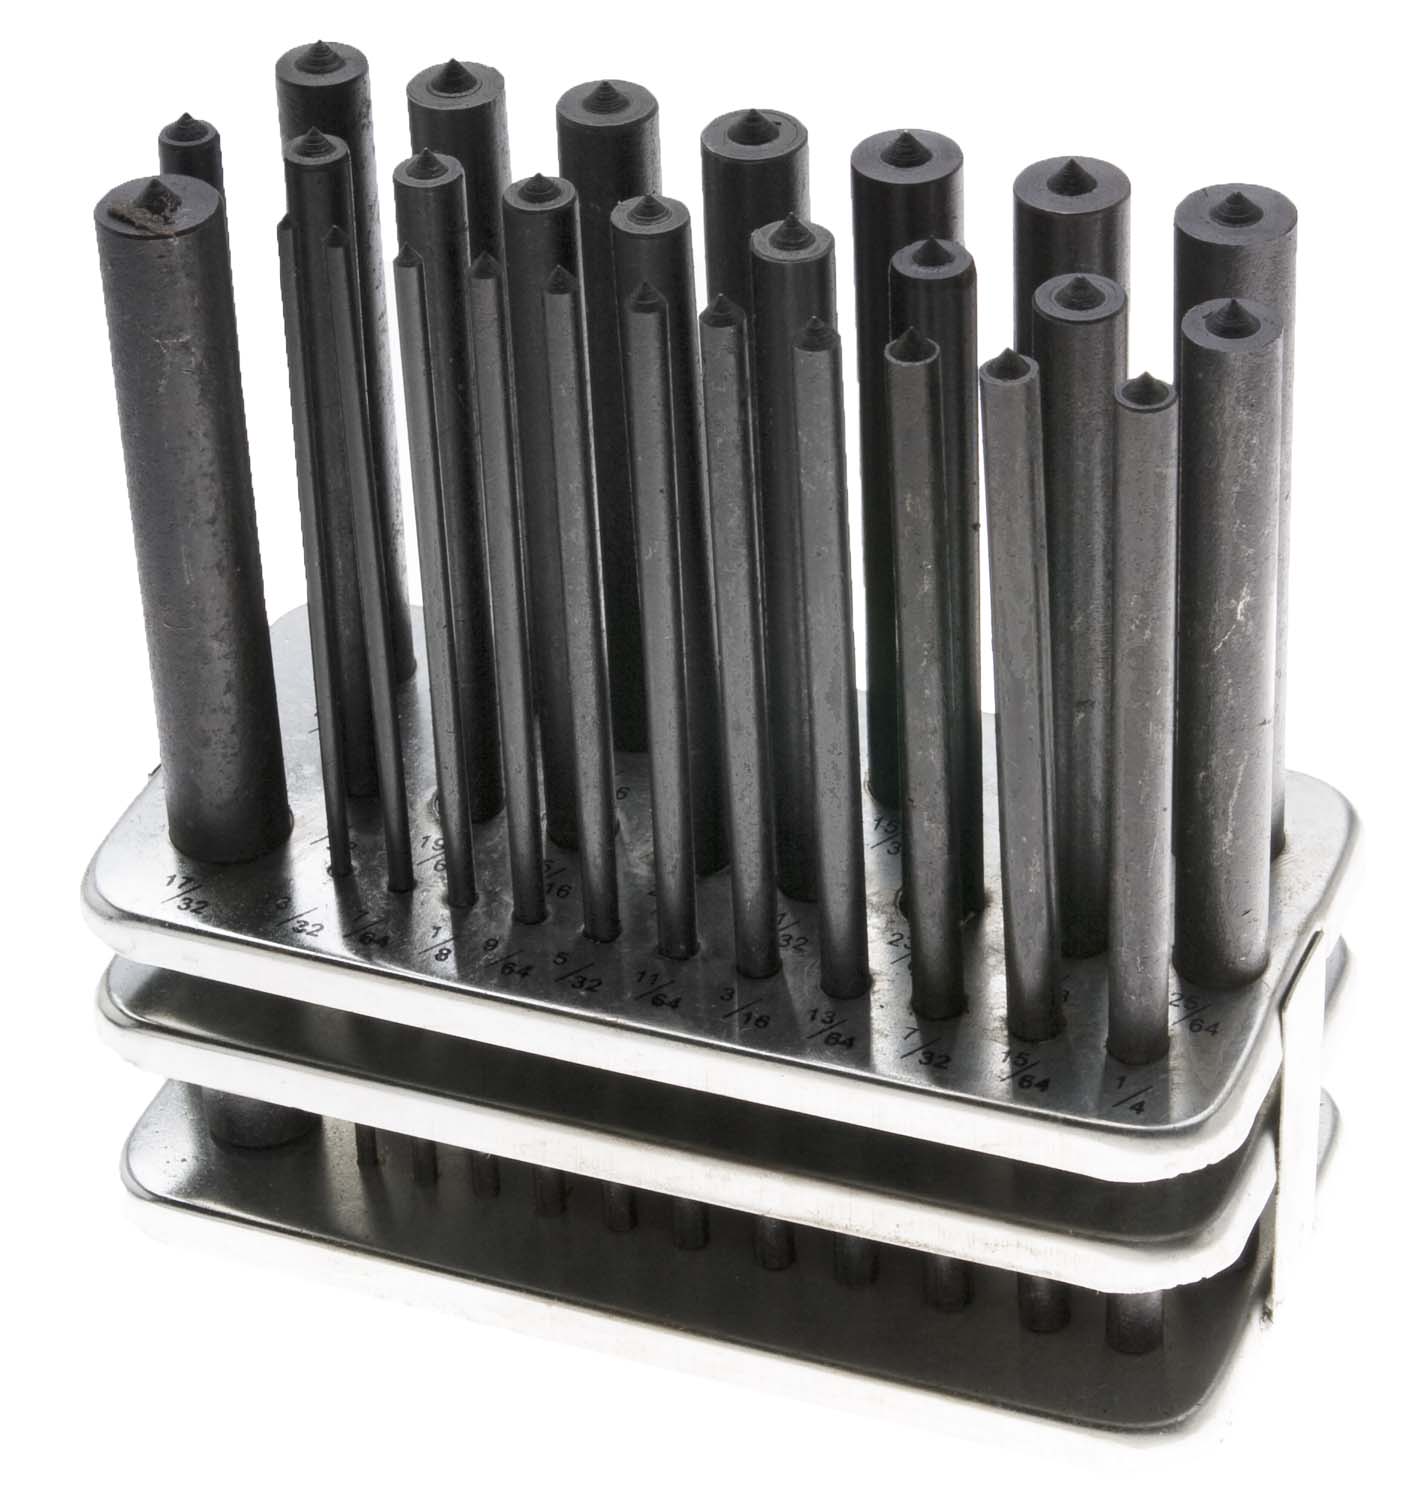 TP-11  1/2" to 1" Transfer Punch Set - 33 Pieces